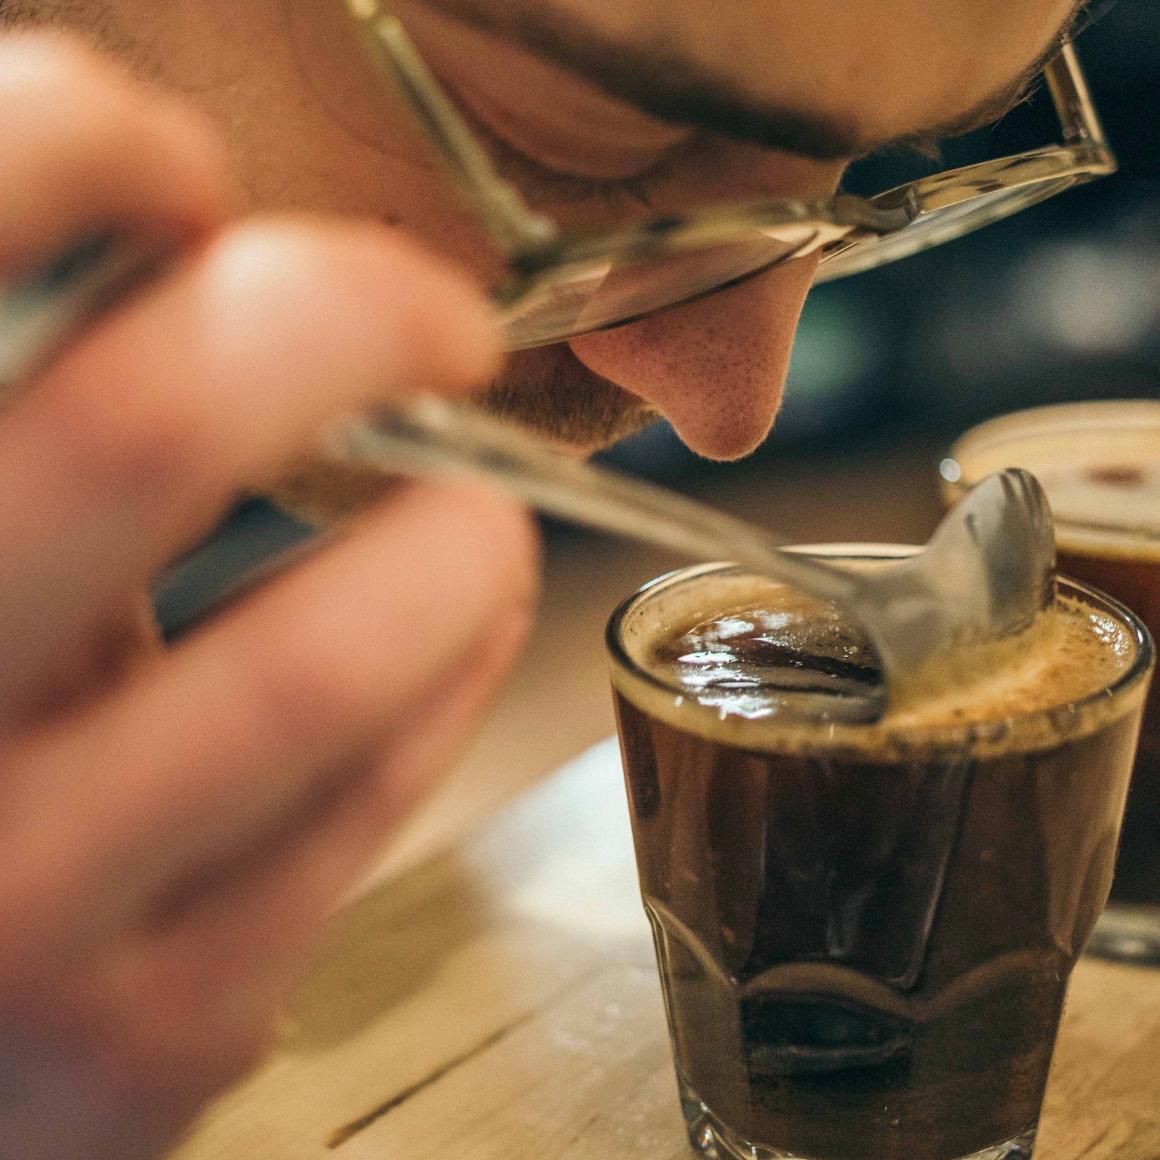 A man puts his nose over a glass of coffee to determine its aroma.